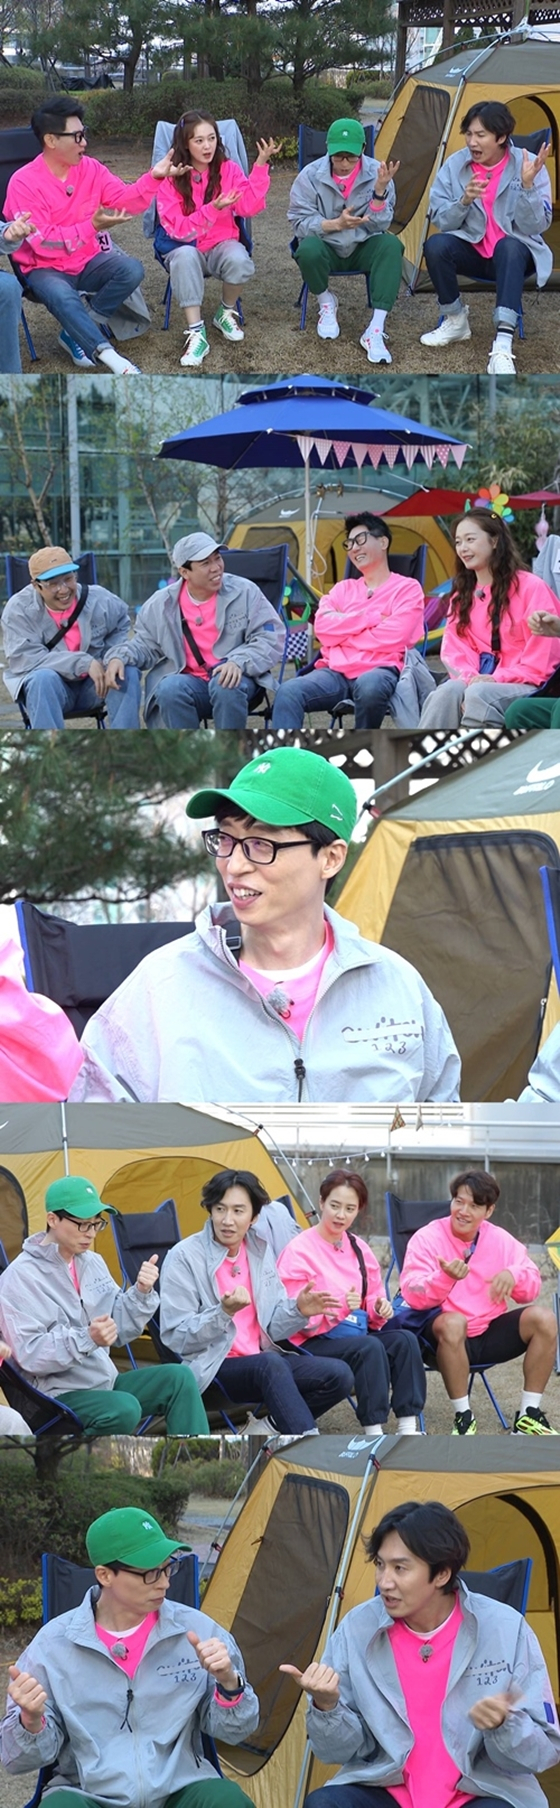 According to SBS on the 9th, SBS entertainment program Running Man which is broadcasted on the afternoon of this day depicts Yoo Jae-Suk who is nervous about Strawberry Game which returned.On this day, the broadcast will be decorated with a go to the broadcasting station race, which will digest SBS representative entertainment schedules at the broadcasting station.Another variant mission of Strawberry Game, which became Running Man signature game, will be released.Yoo Jae-Suk, who was very nervous about the usual beat game and showed the symptoms of Game Nausea, recently laughed at the members with a nervous look as soon as he heard the game method in the recording.Yoo Jae-Suk, who failed from the first attempt, appealed that the rules were difficult, but the members focused on Yoo Jae-Suk and spurred on Yoo Jae-Suk teasing.As the voice of Yoo Jae-Suk became smaller and smaller in the ongoing attack, Lee Kwang-soo was sincerely sorry that Park Jae-seok is the first time I have seen his brother so confident.Even Yoo Jae-Suk was wrong, but he did not know it alone and attacked with sharp eyes, and even though he succeeded, he was constantly teased with his eyes, saying, Is it right?However, when Yoo Jae-Suks attack succeeded, the members said, Park Jae-seoks lips were purple and slightly pink, and Park Jae-seok knew now.Indeed, there is interest in whether Yoo Jae-Suk could have overcome Game Nausea thanks to cheering.